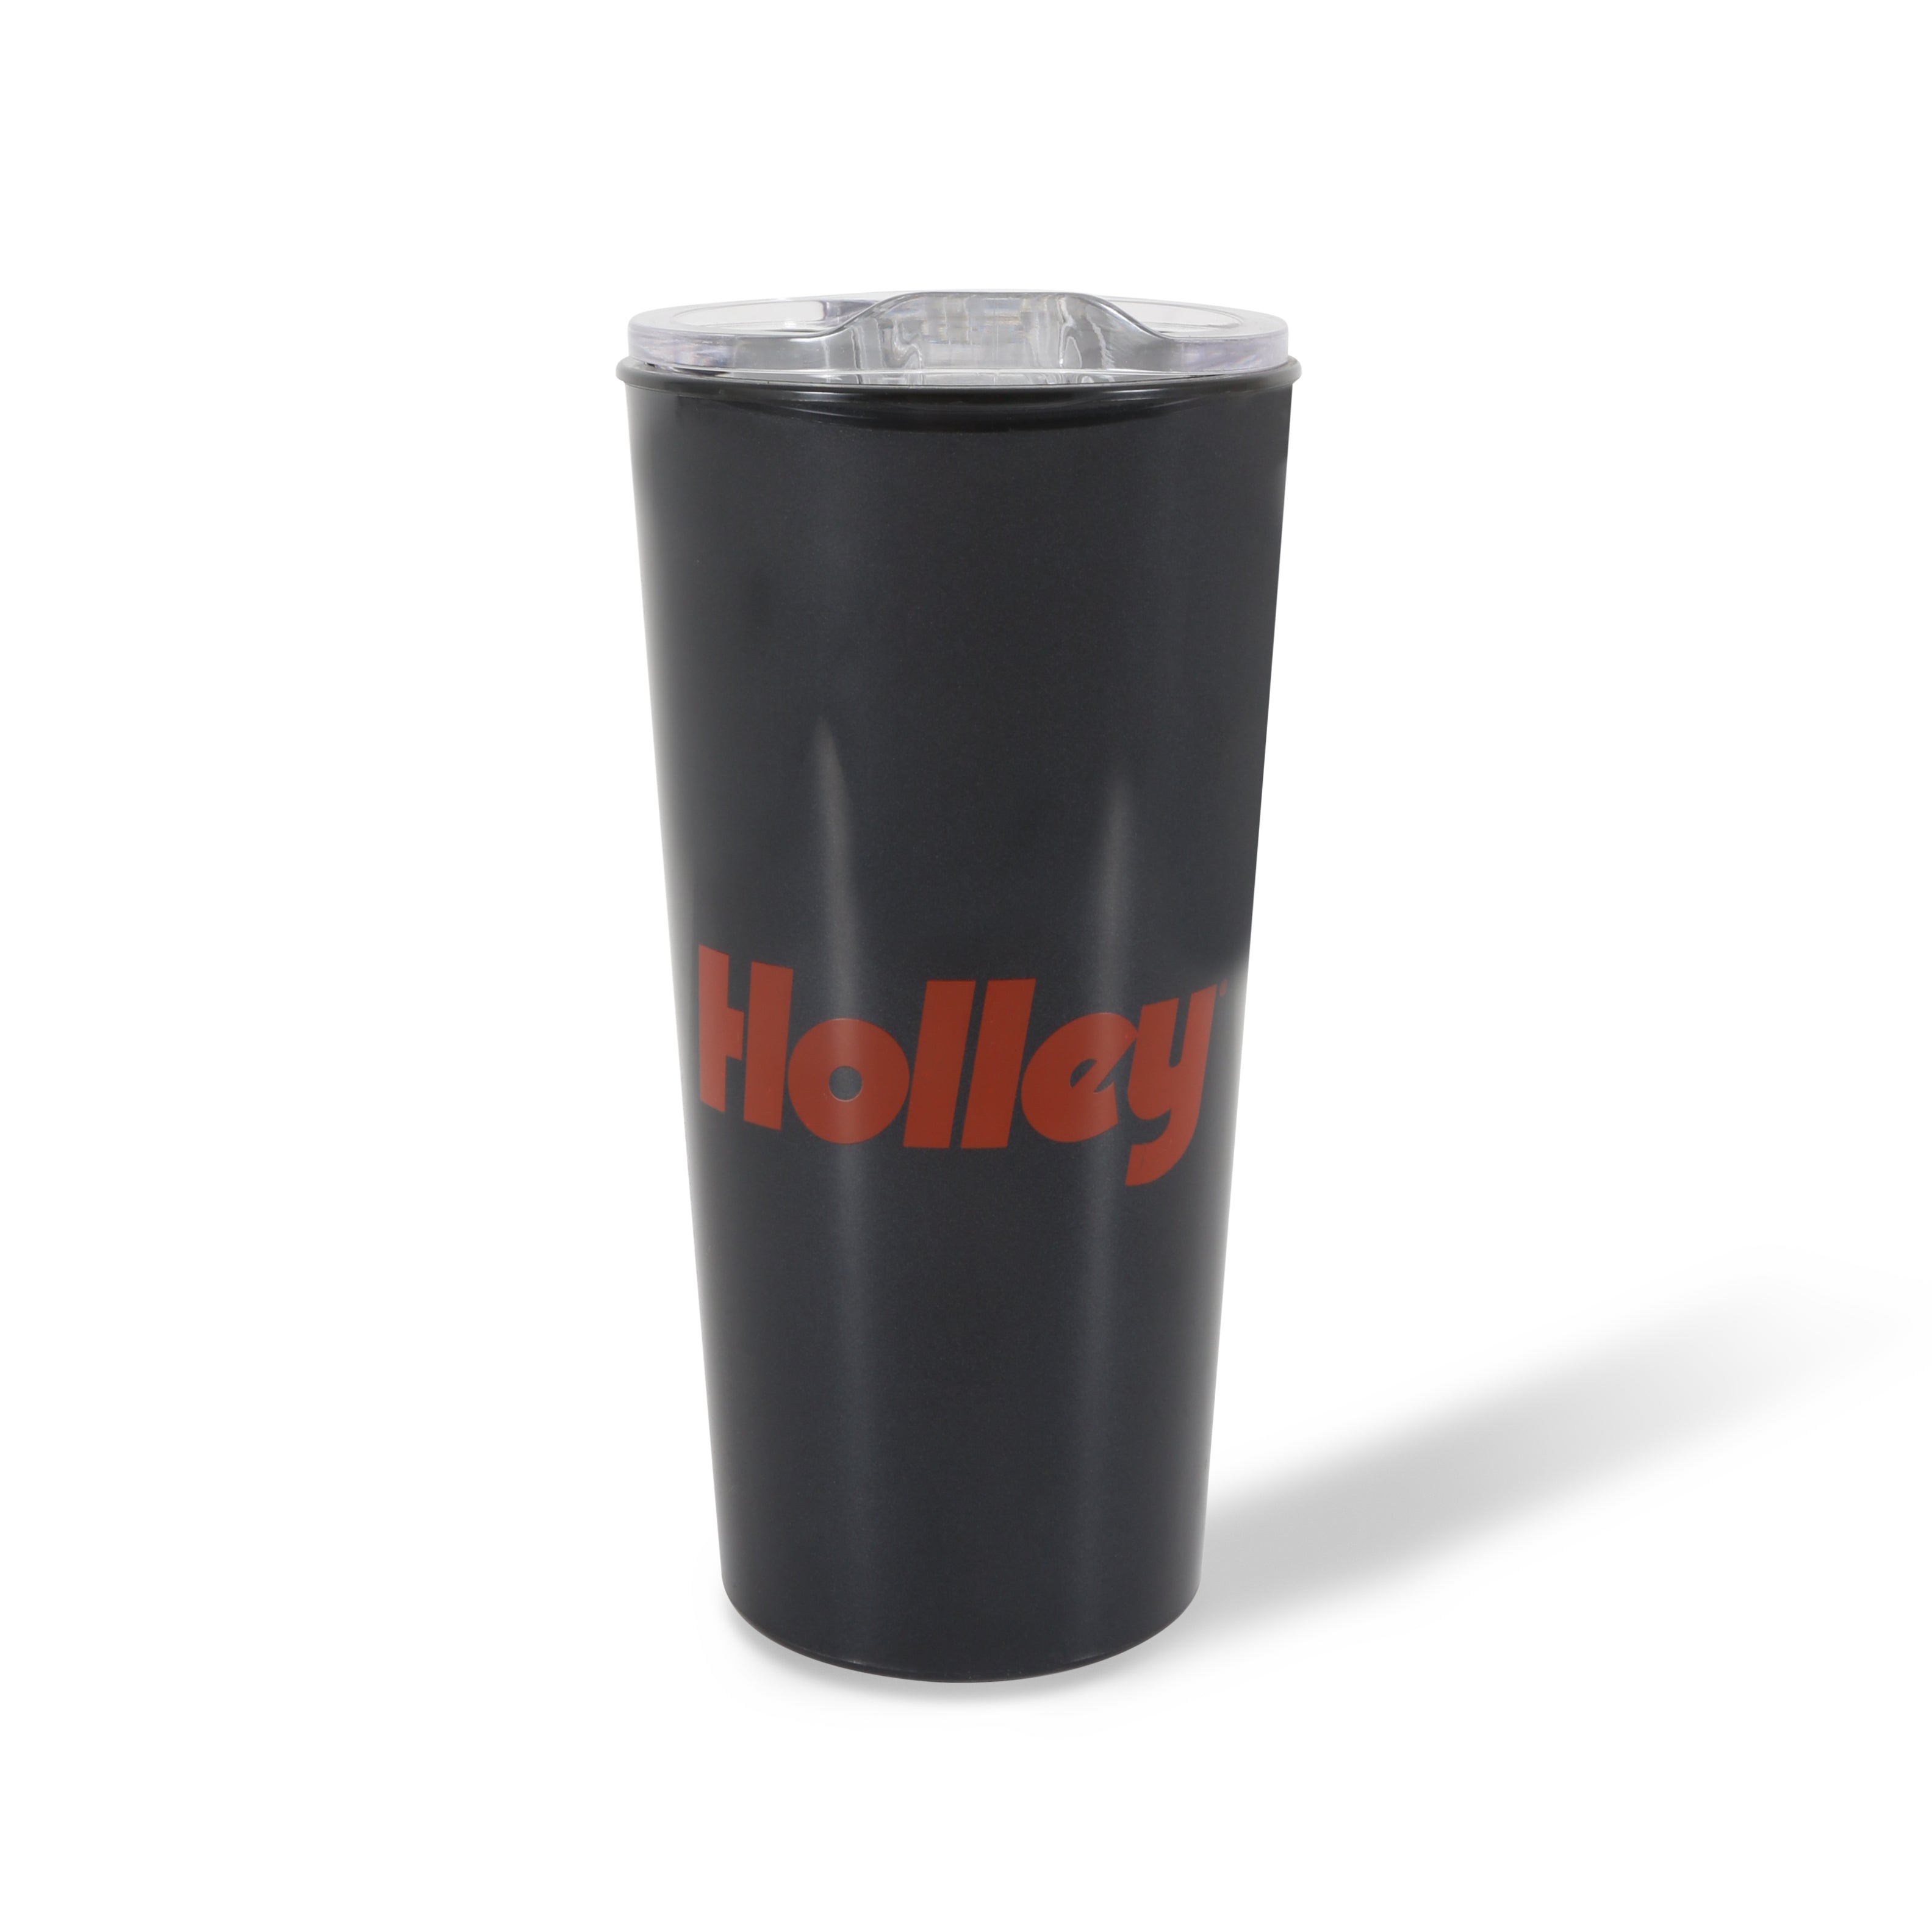 Holley Cup Coffee Tumbler 18-oz 36-587